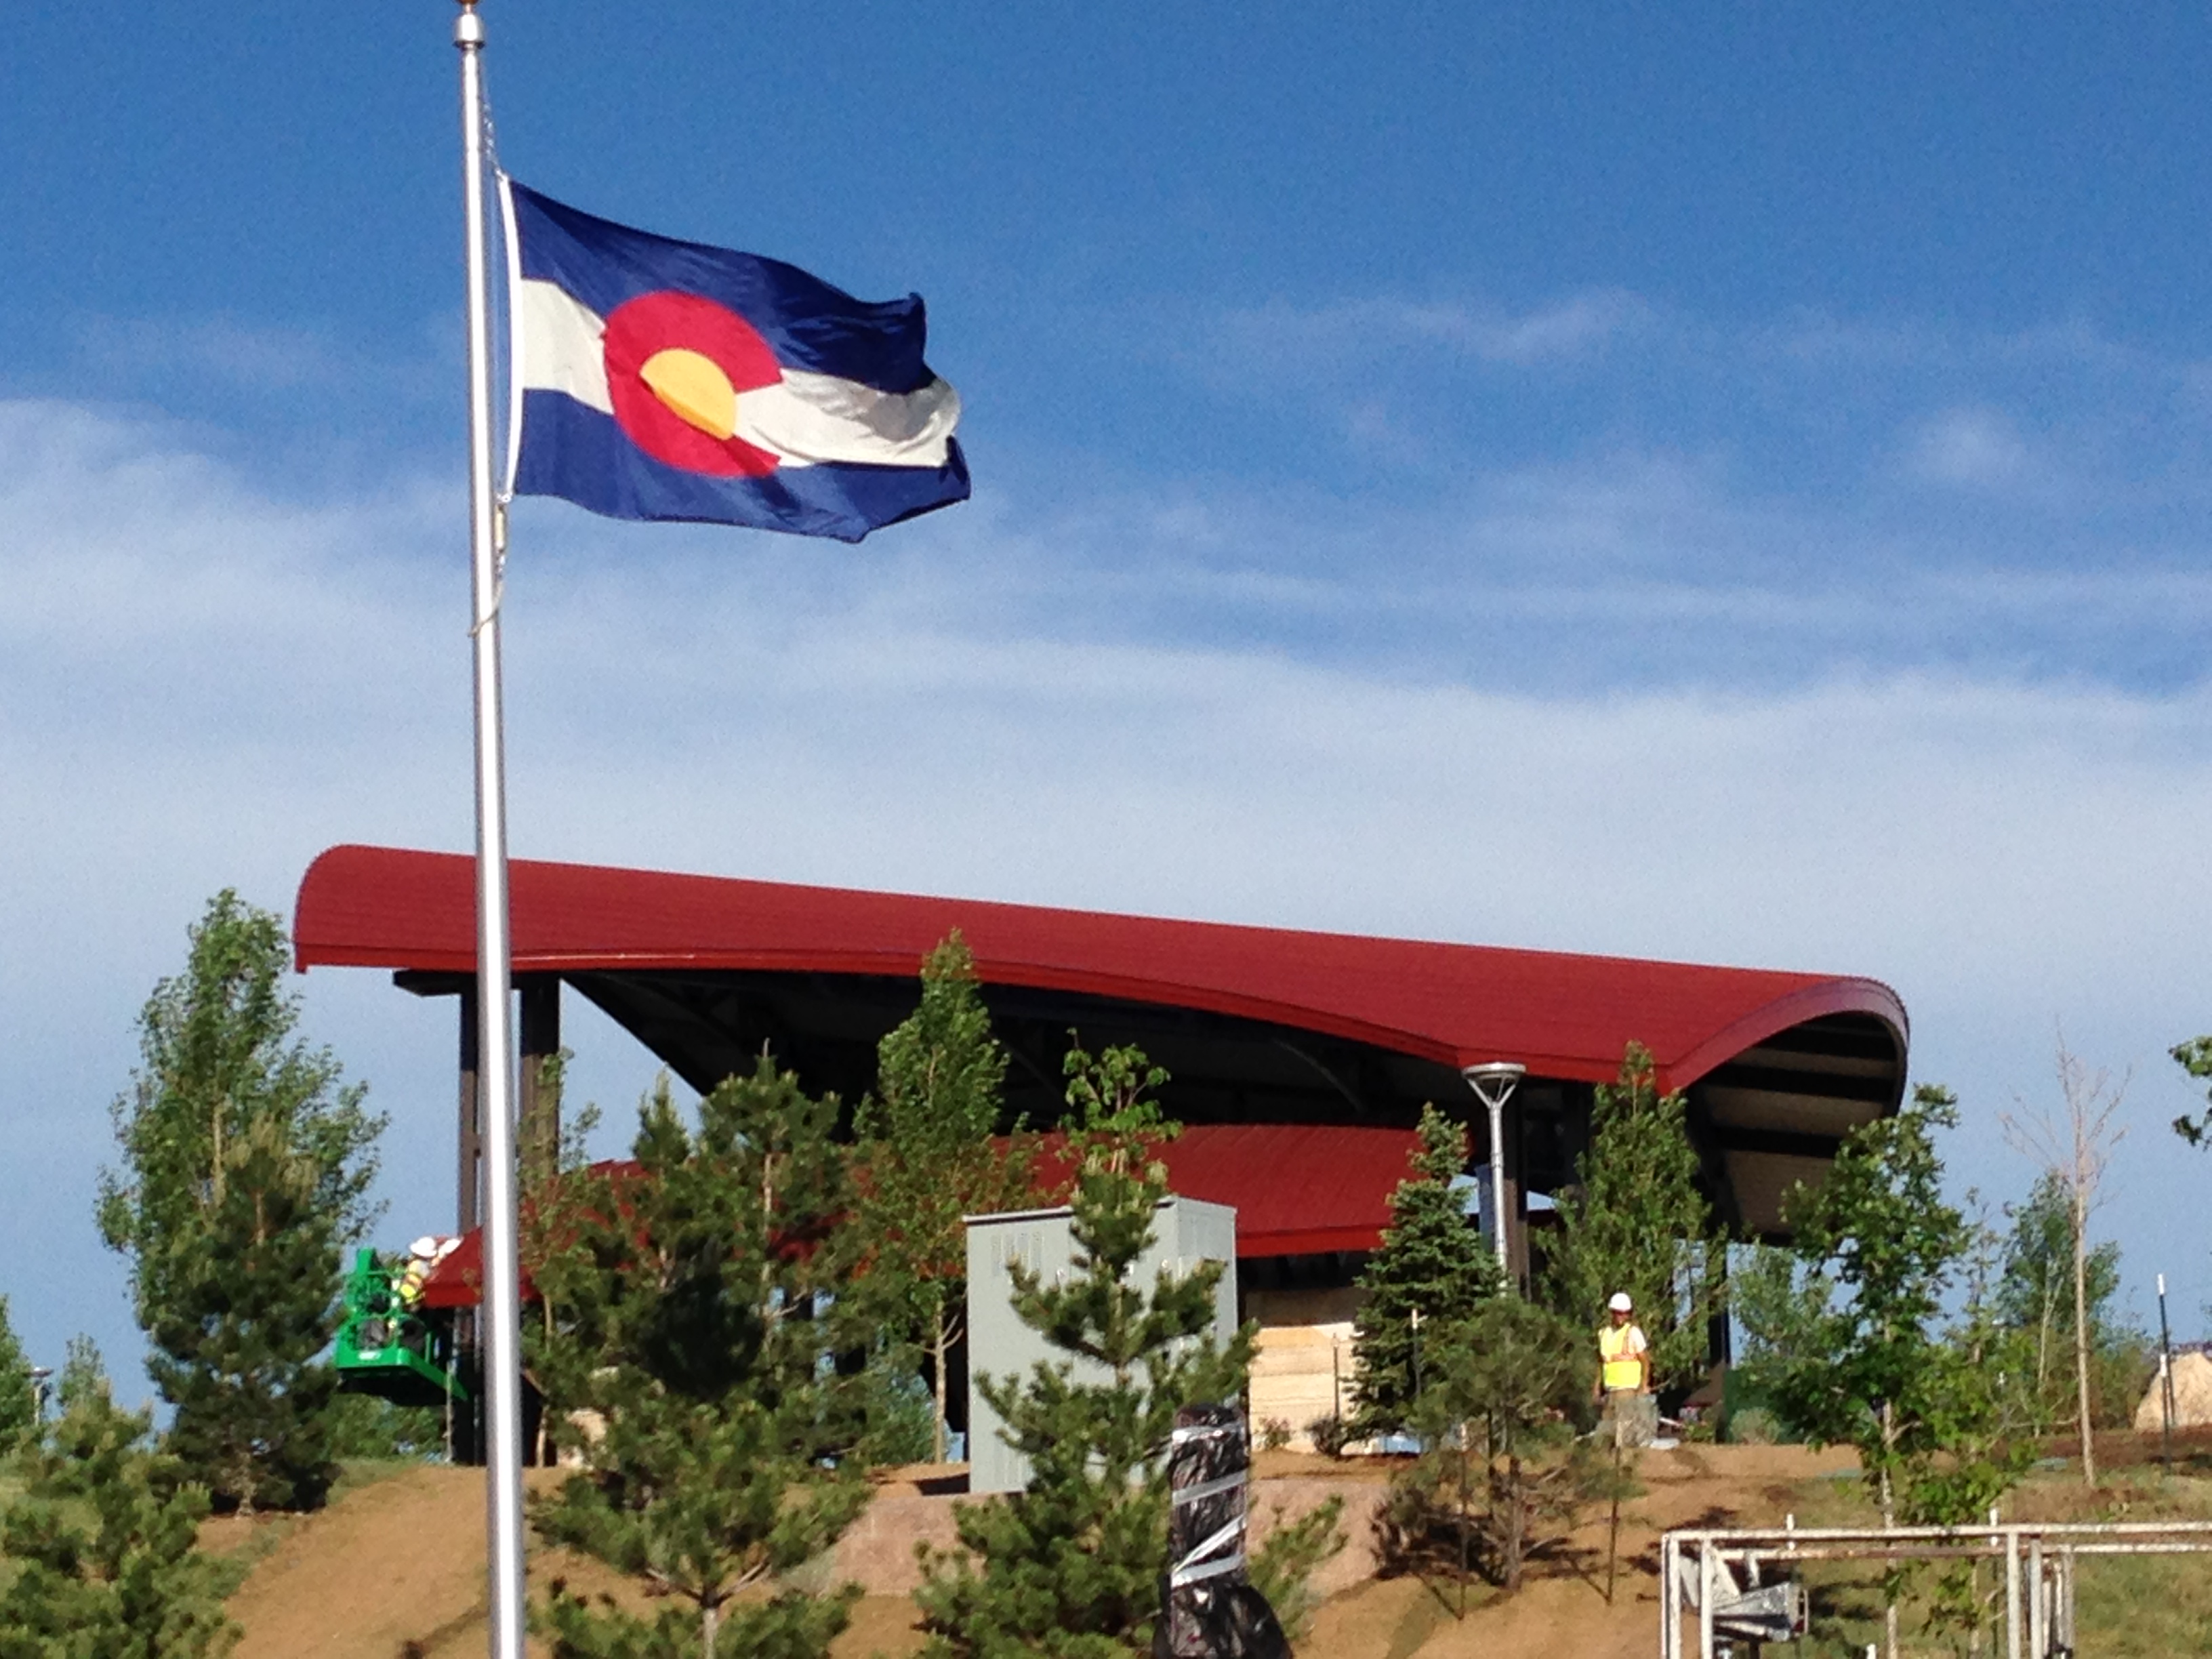 Curved Steel Canopy at Centennial Center Park in Colorado 